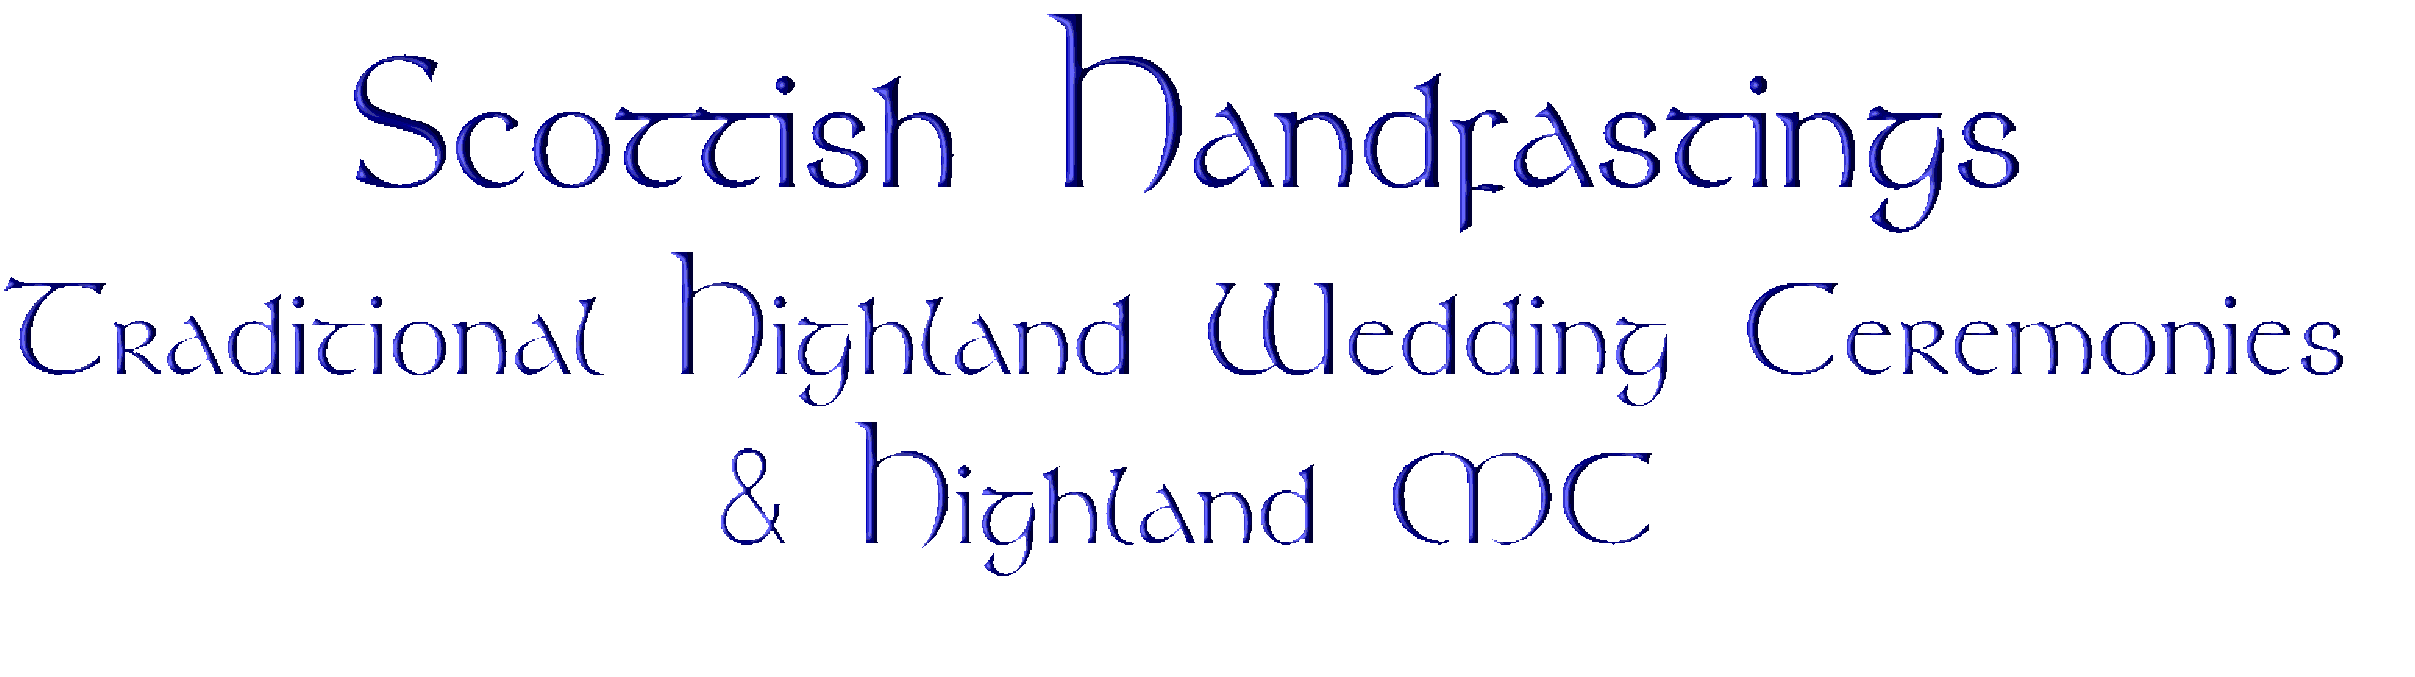 Highland Blessings - Scottish Master of Wedding Ceremonies in the Highland traditions